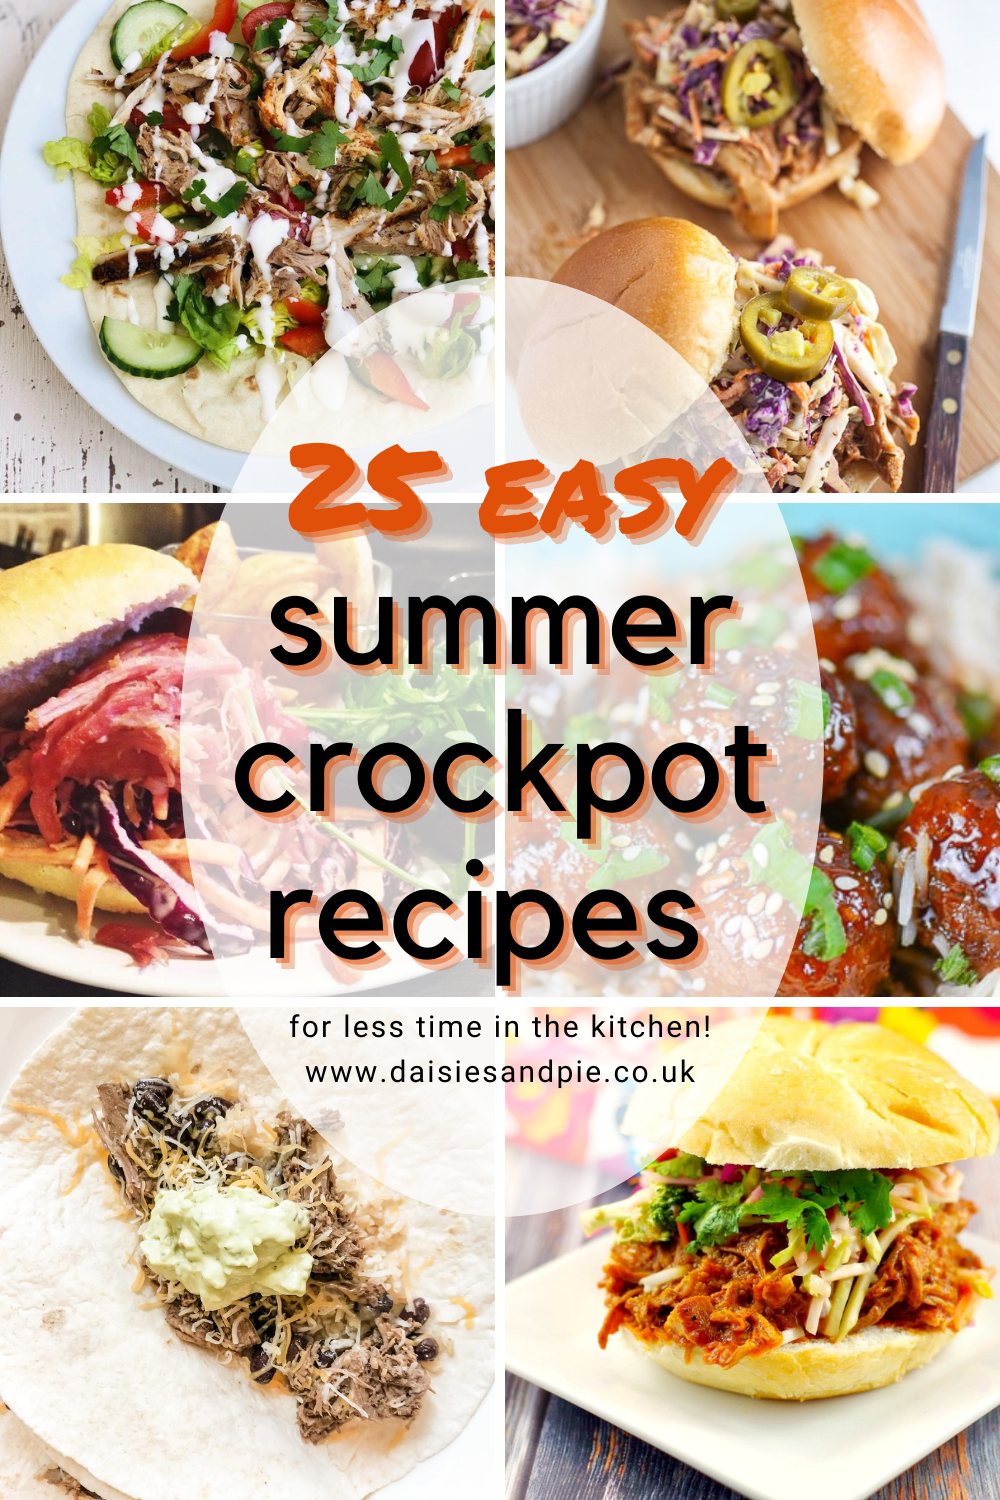 Stay Cool this Summer with Simple and Tasty Slow Cooker Recipes